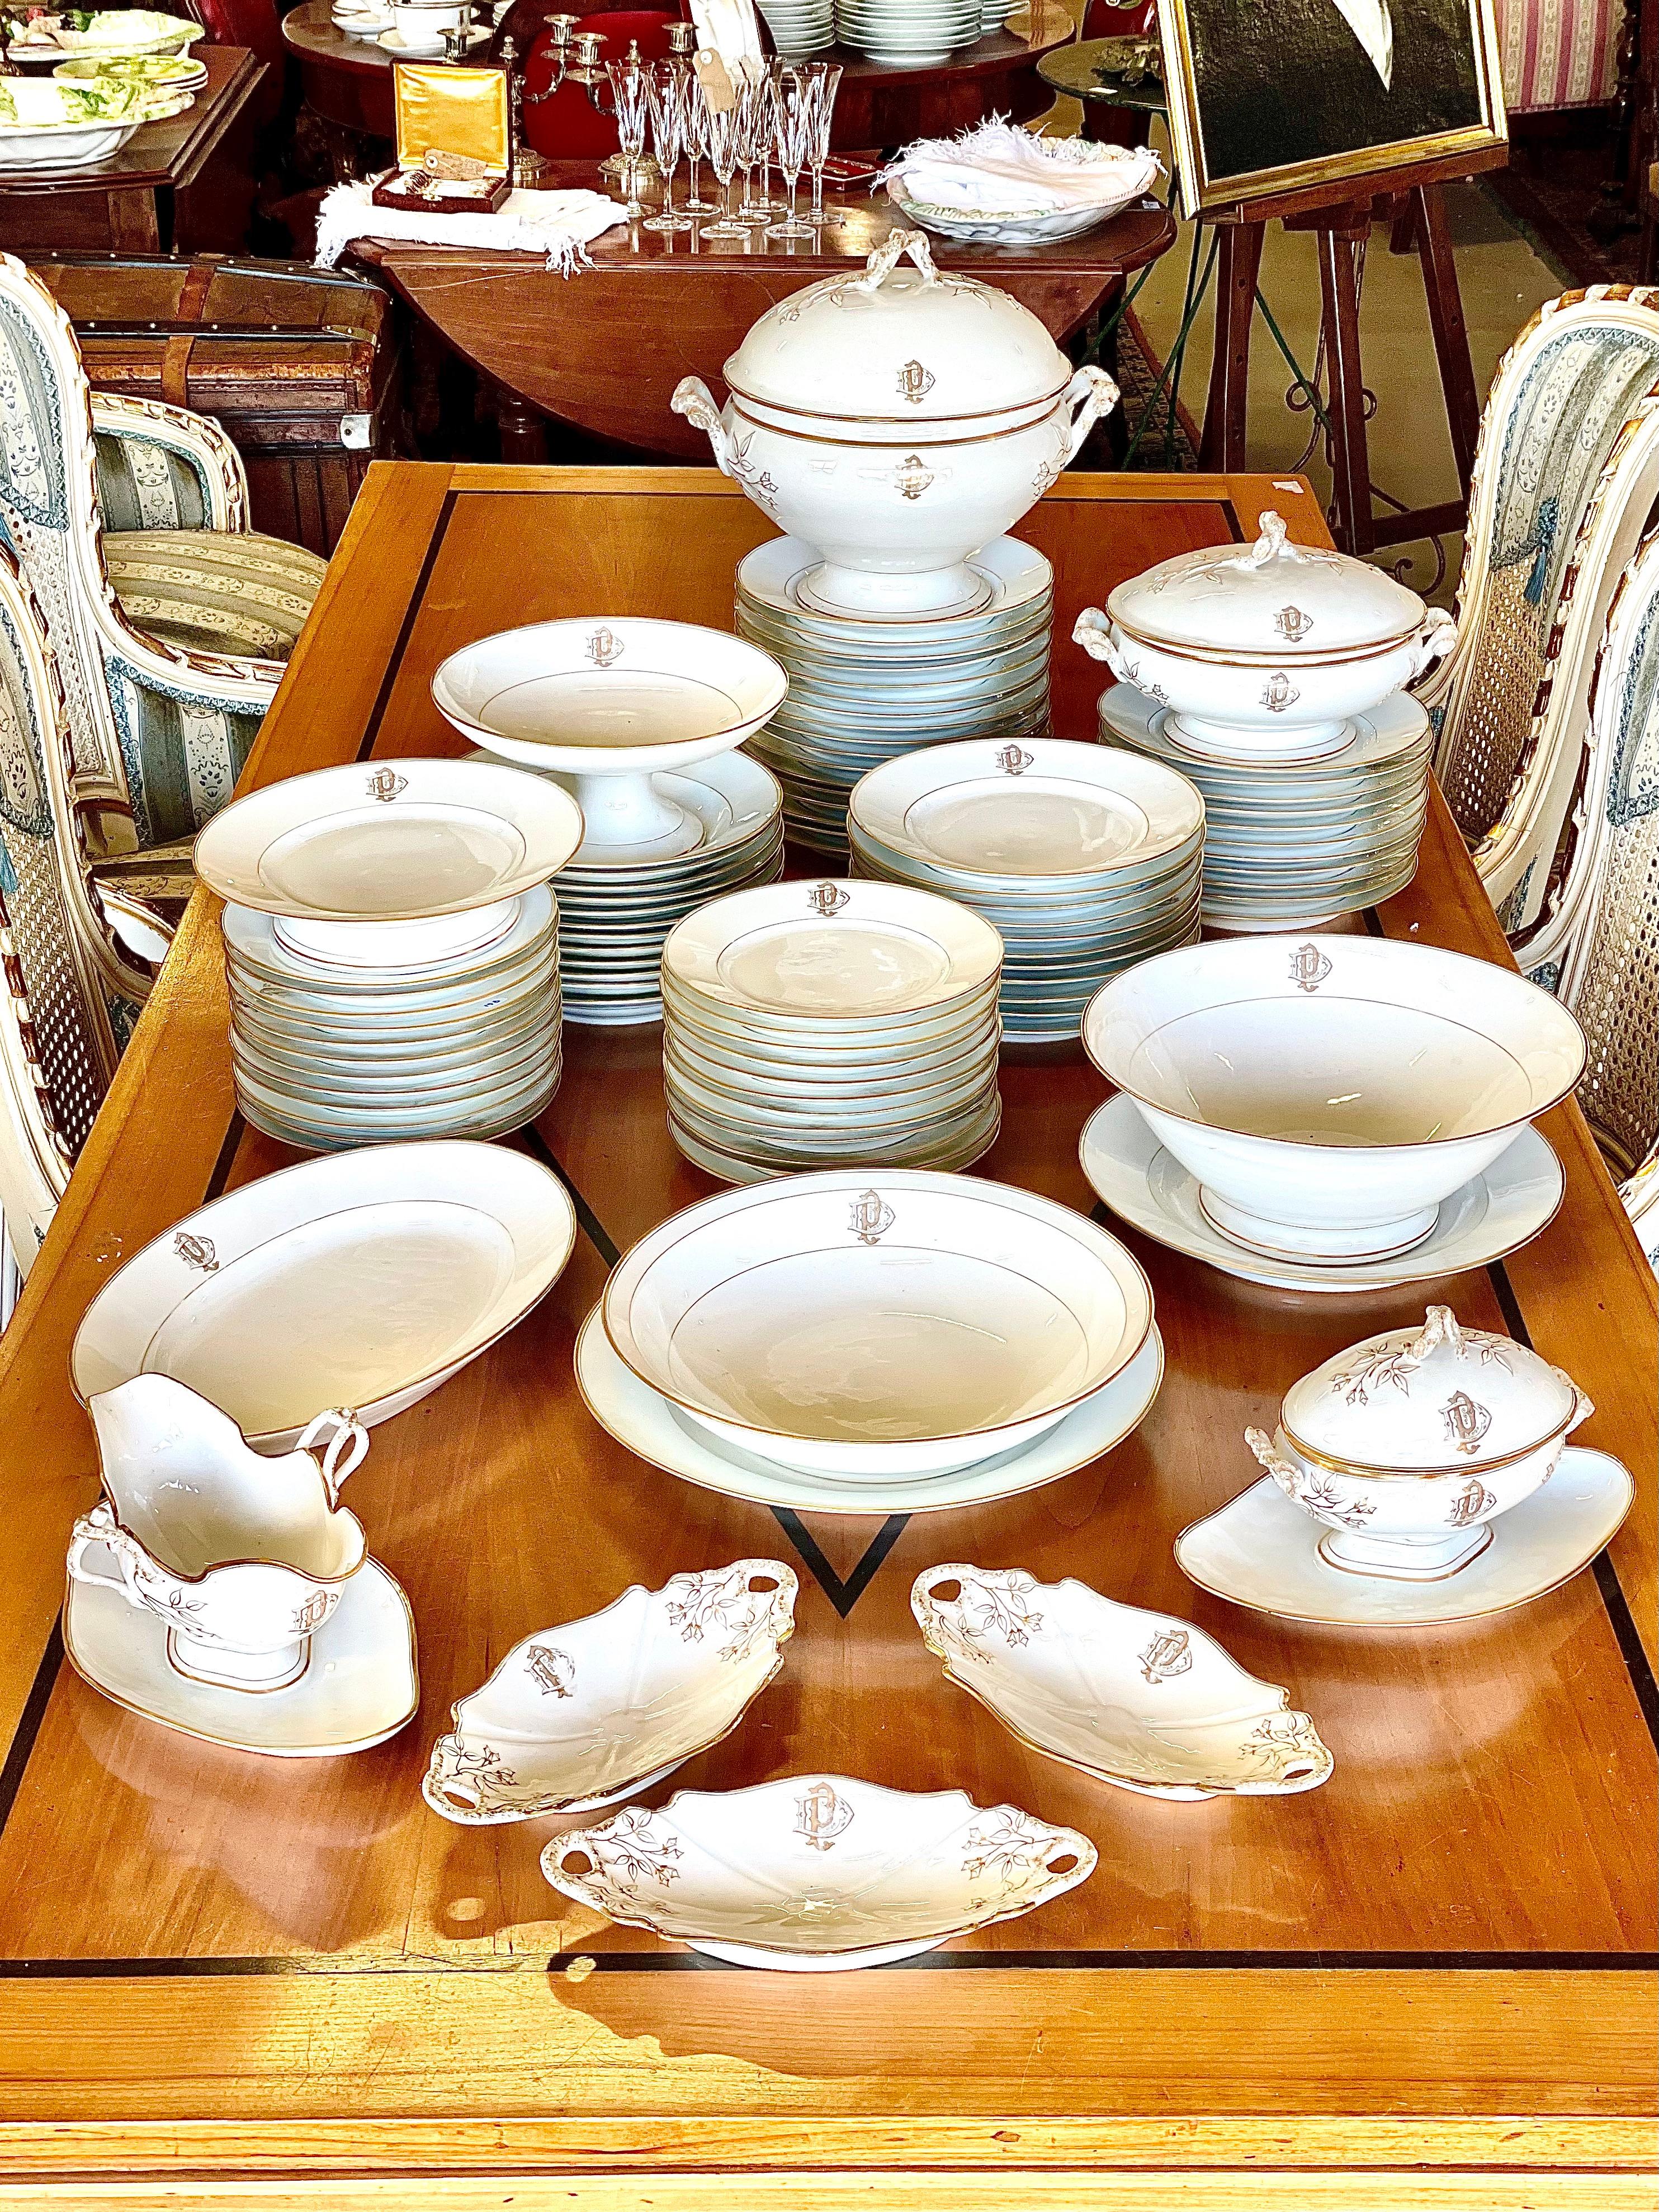 Limoges Porcelain Set of 50 Piece Dinner Service with Gilt Edges and Monogramme For Sale 3